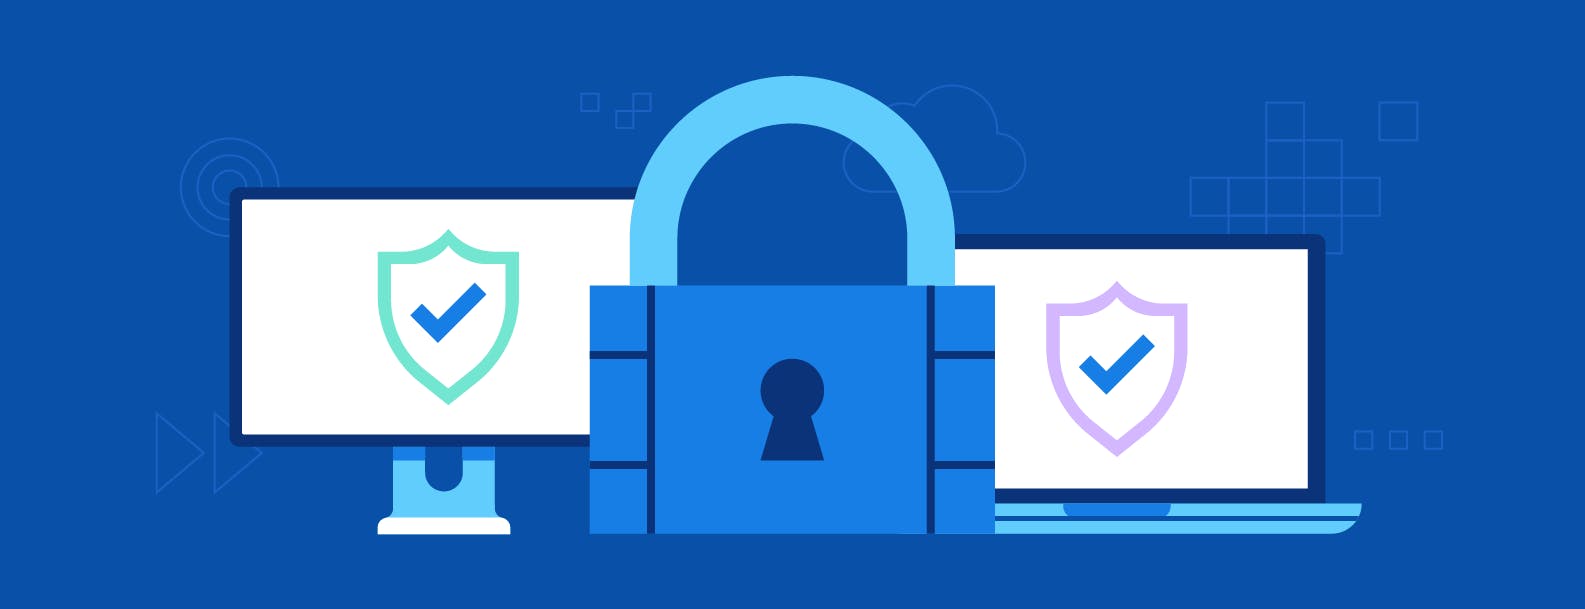 How to Evaluate Your Company’s Security Posture 